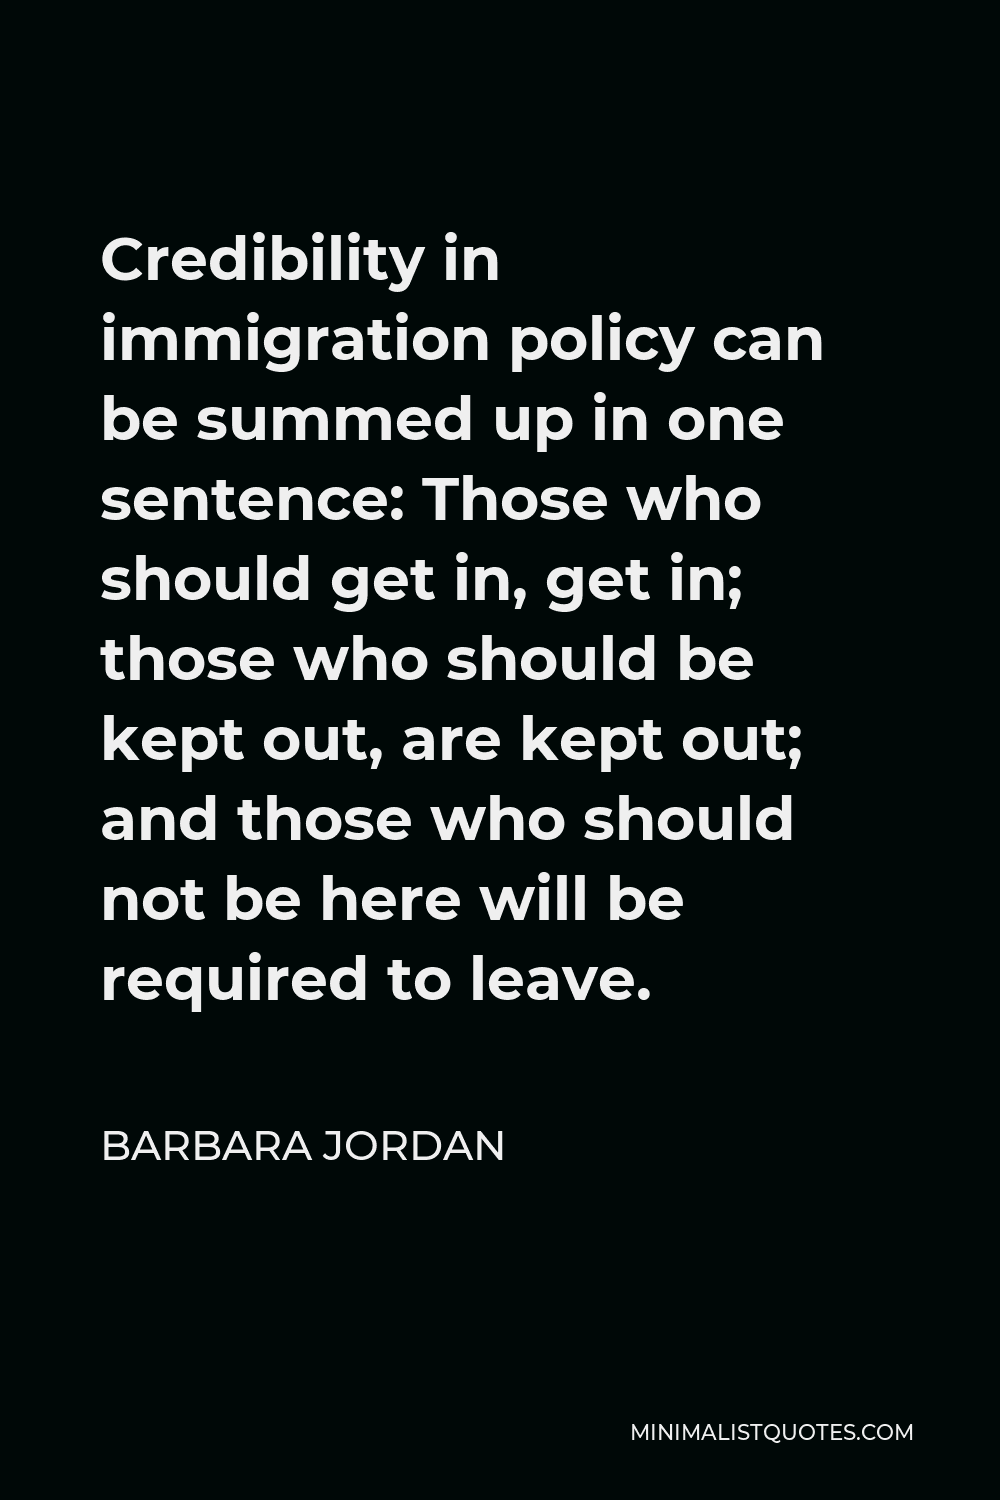 Barbara Jordan Quote - Credibility in immigration policy can be summed up in one sentence: Those who should get in, get in; those who should be kept out, are kept out; and those who should not be here will be required to leave.